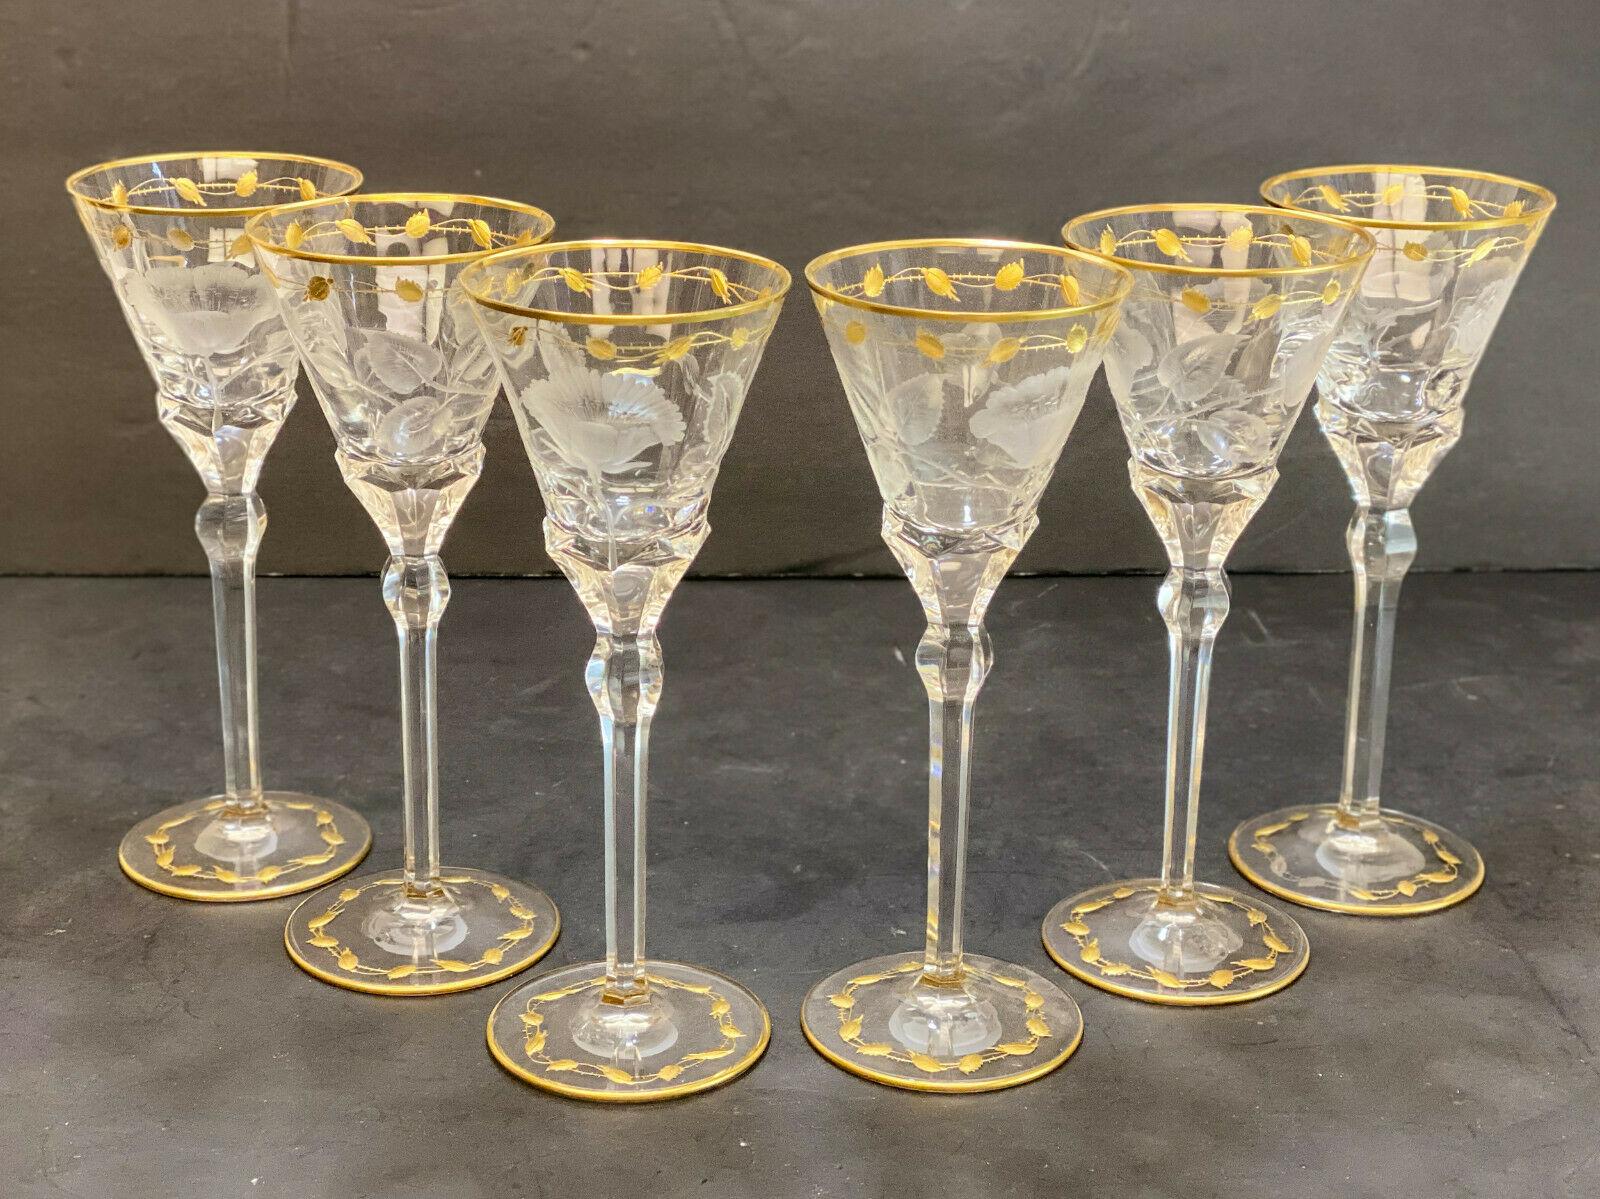 Early 20th Century Moser Cut Glass and Gilt Drink-Ware Service Goblets in Paula Service for 6 For Sale